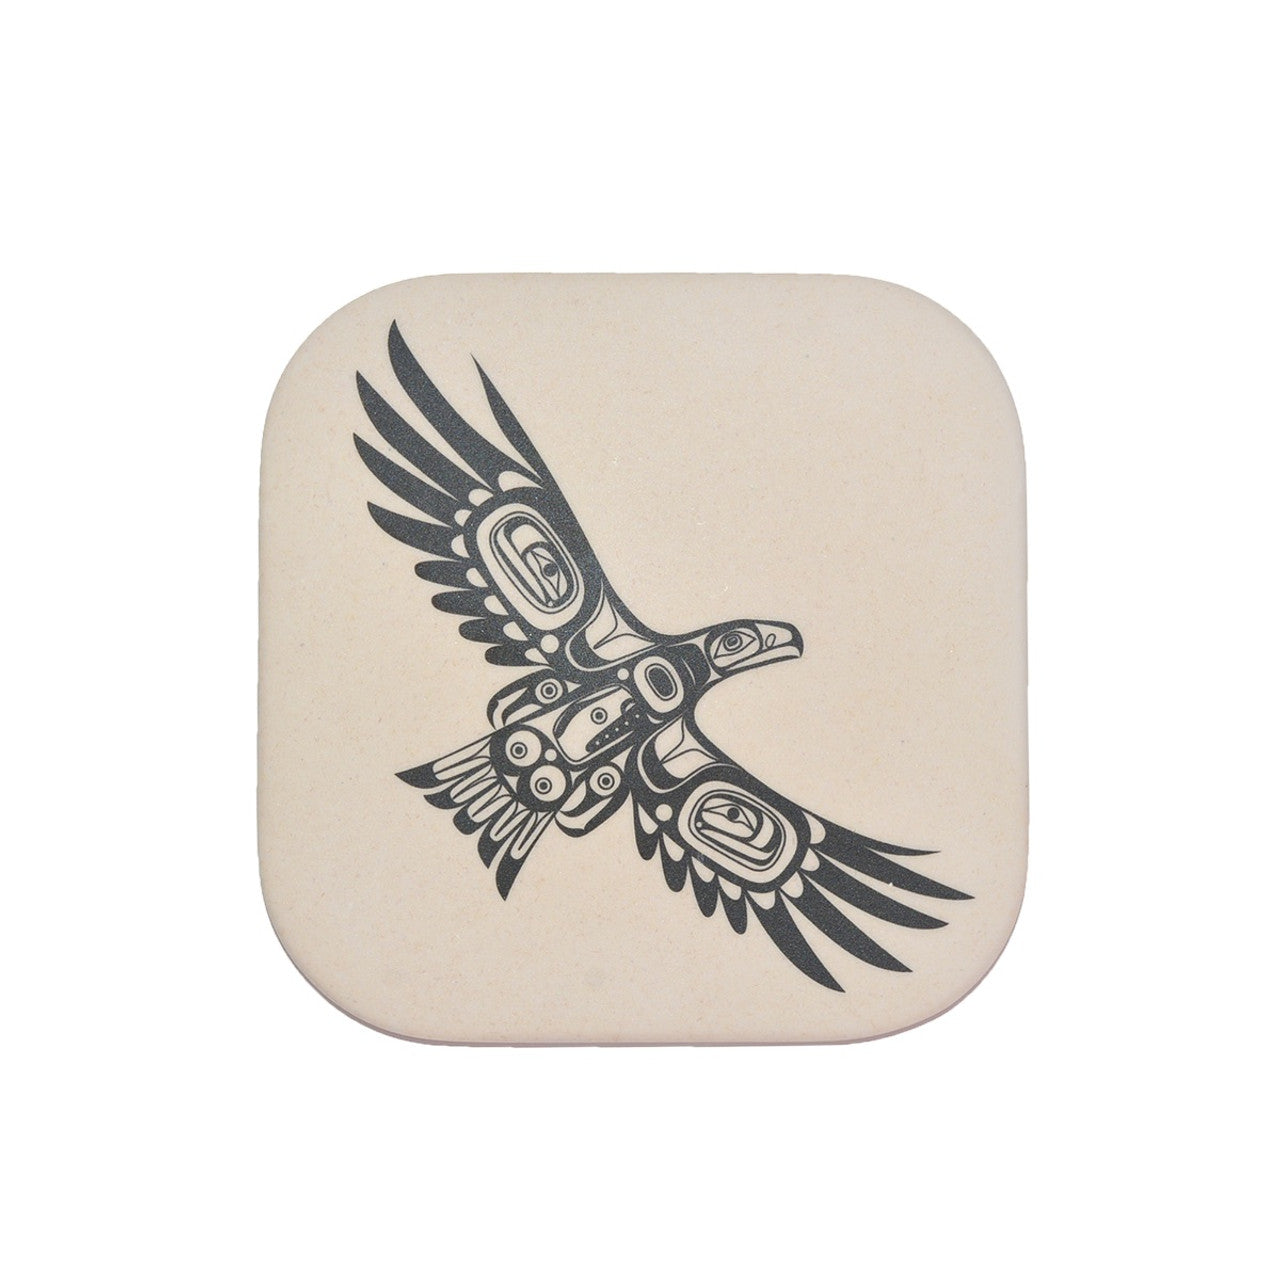 BAMBOO COASTERS - Soaring Eagle - BFCBC - House of Himwitsa Native Art Gallery and Gifts